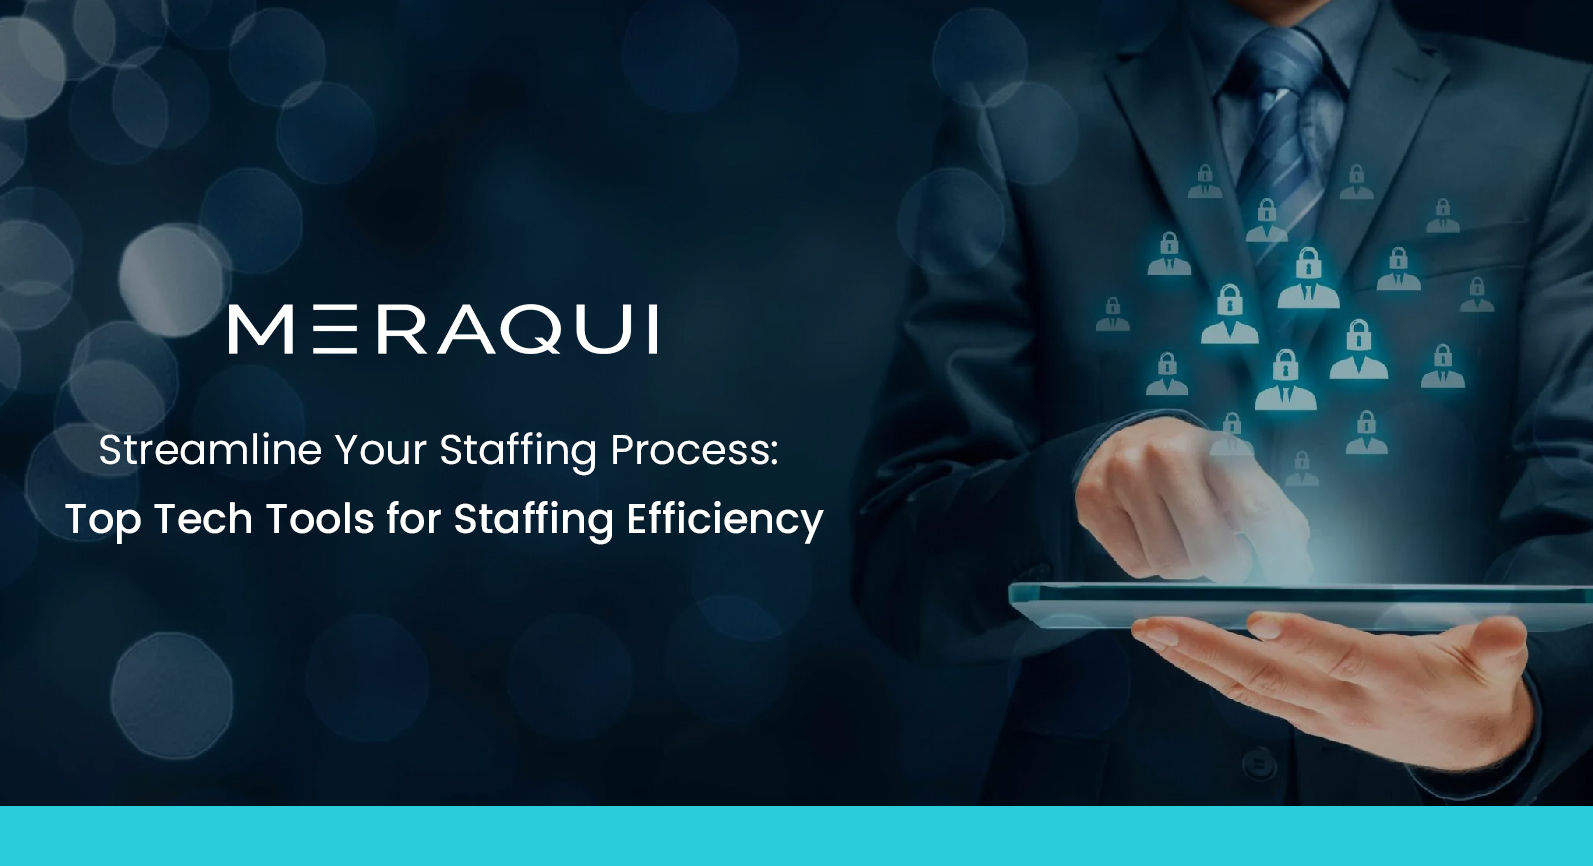 Streamline Your Staffing Process: Top Tech Tools for Staffing Efficiency